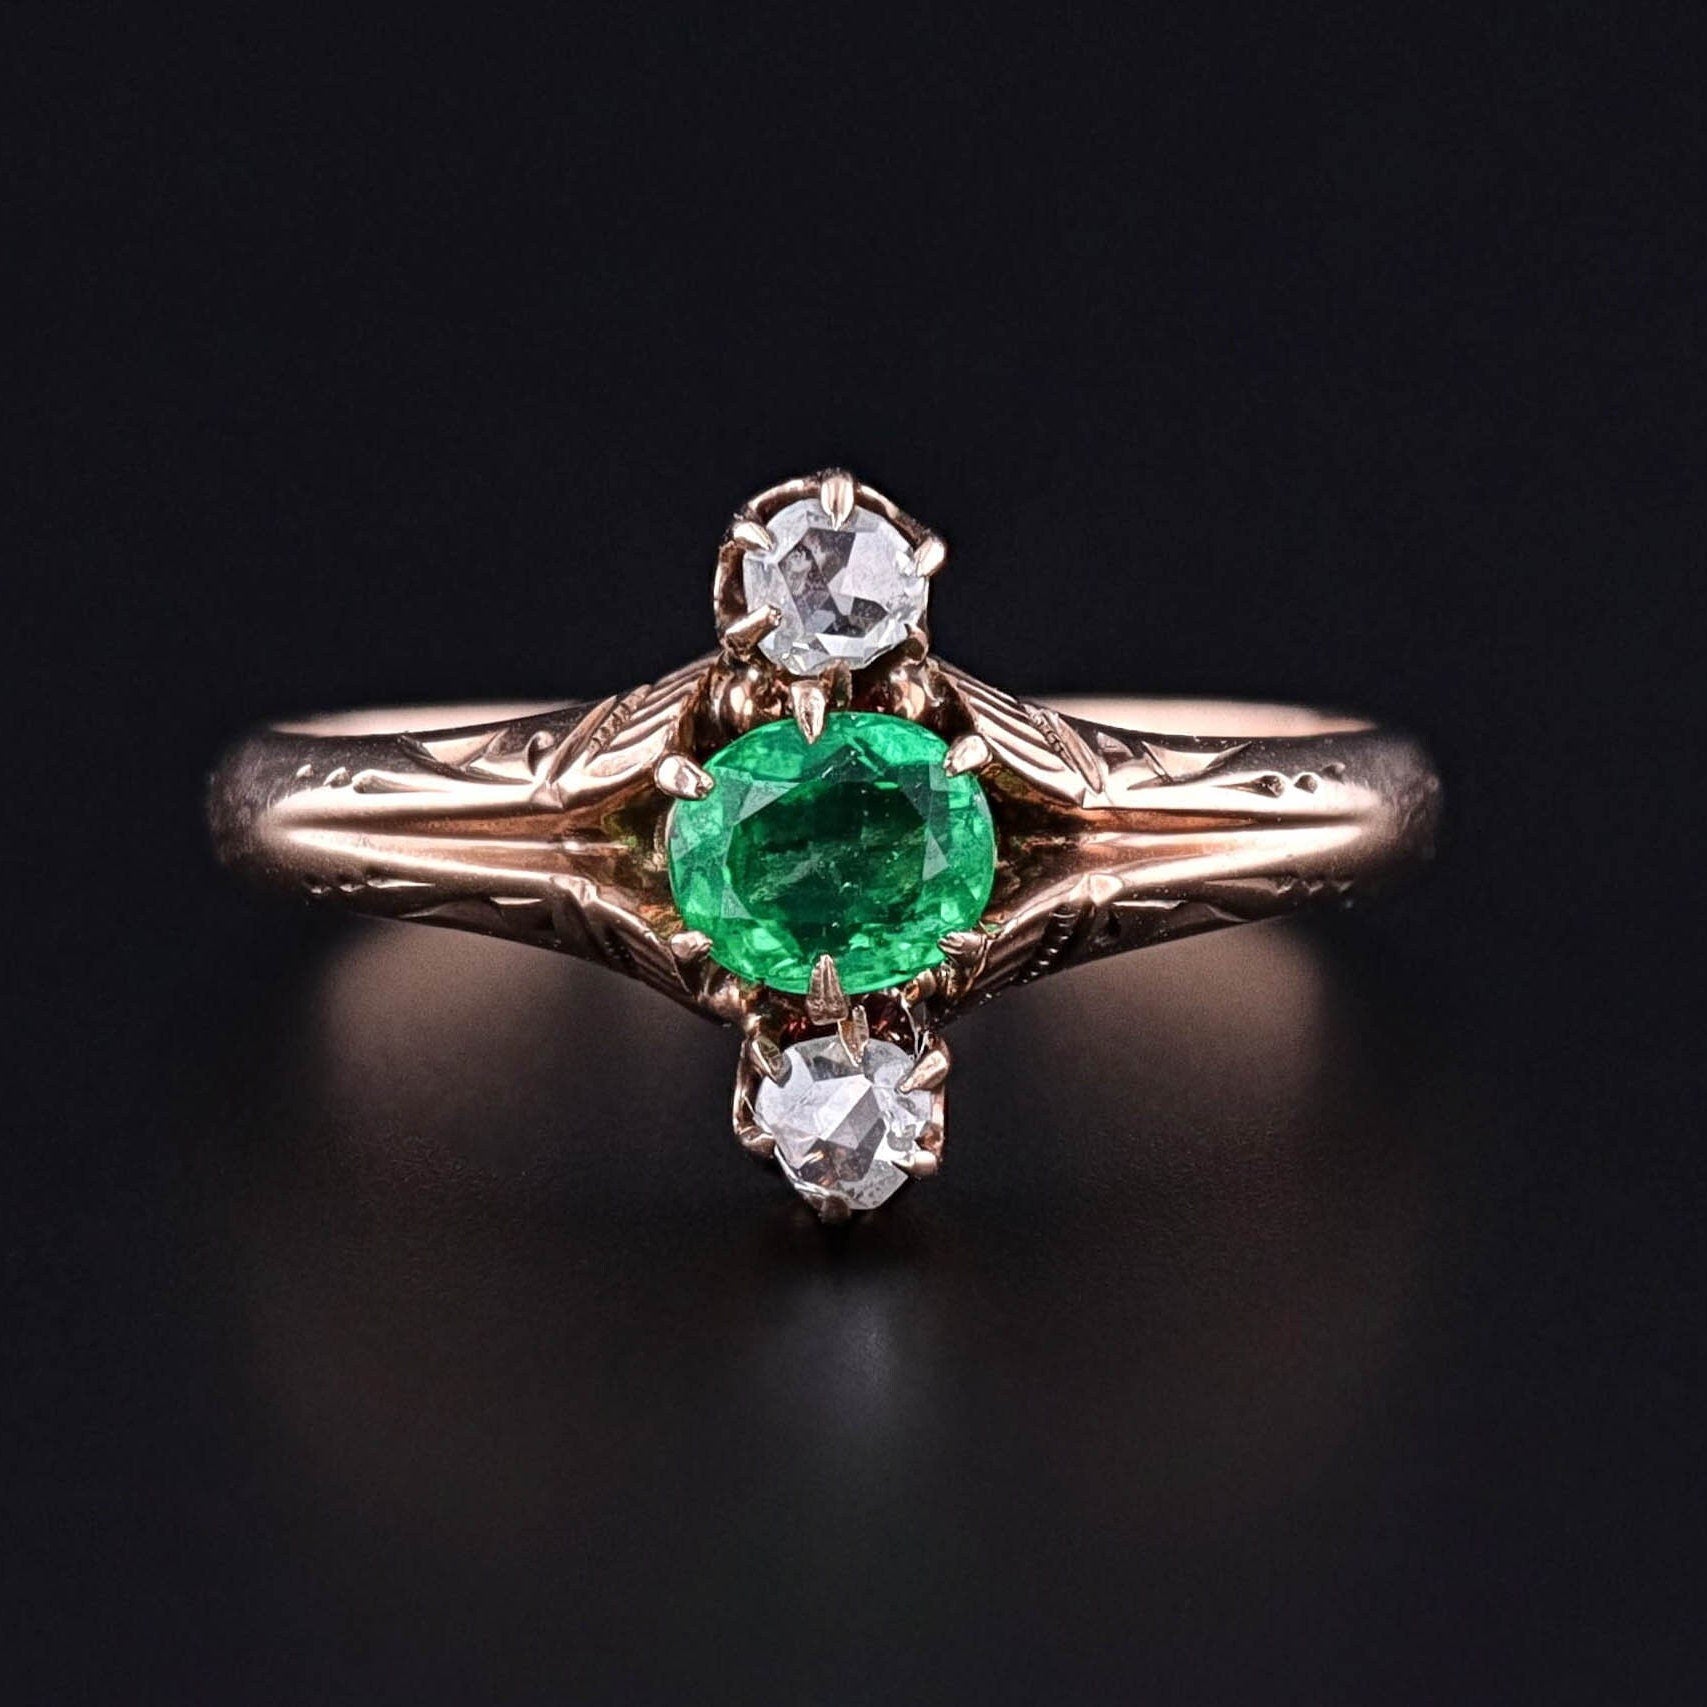 Antique Emerald Ring of 10k Gold